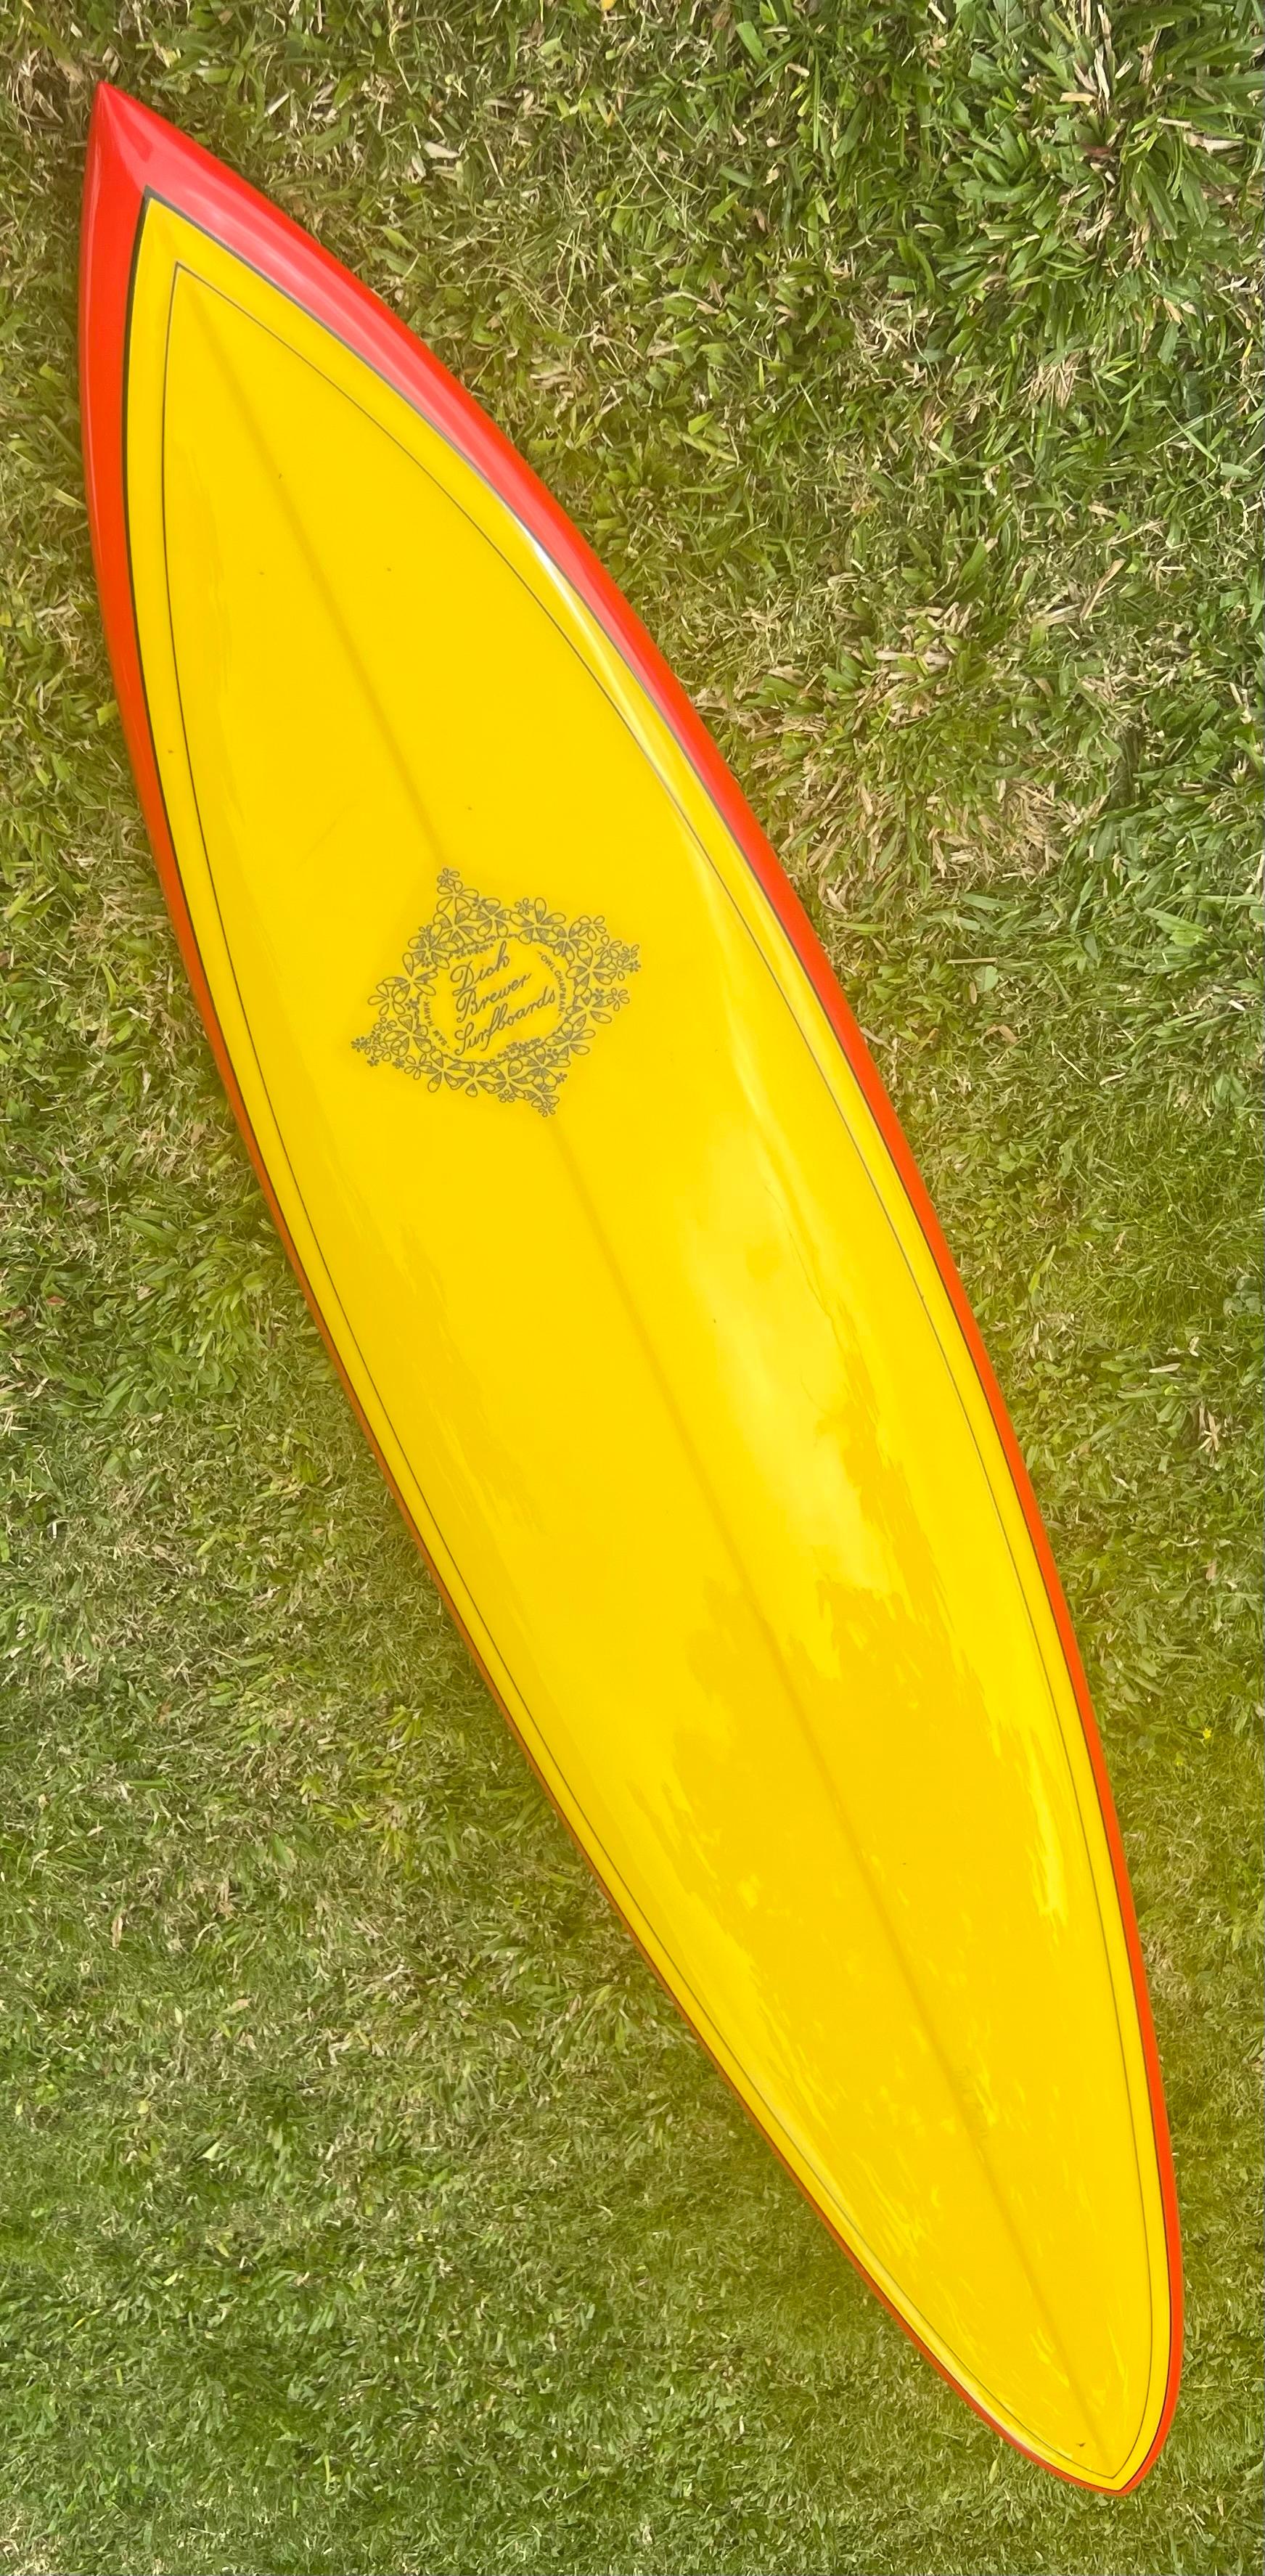 American 1968 Replica Lahaina Clinton Blears model surfboard by Dick Brewer For Sale